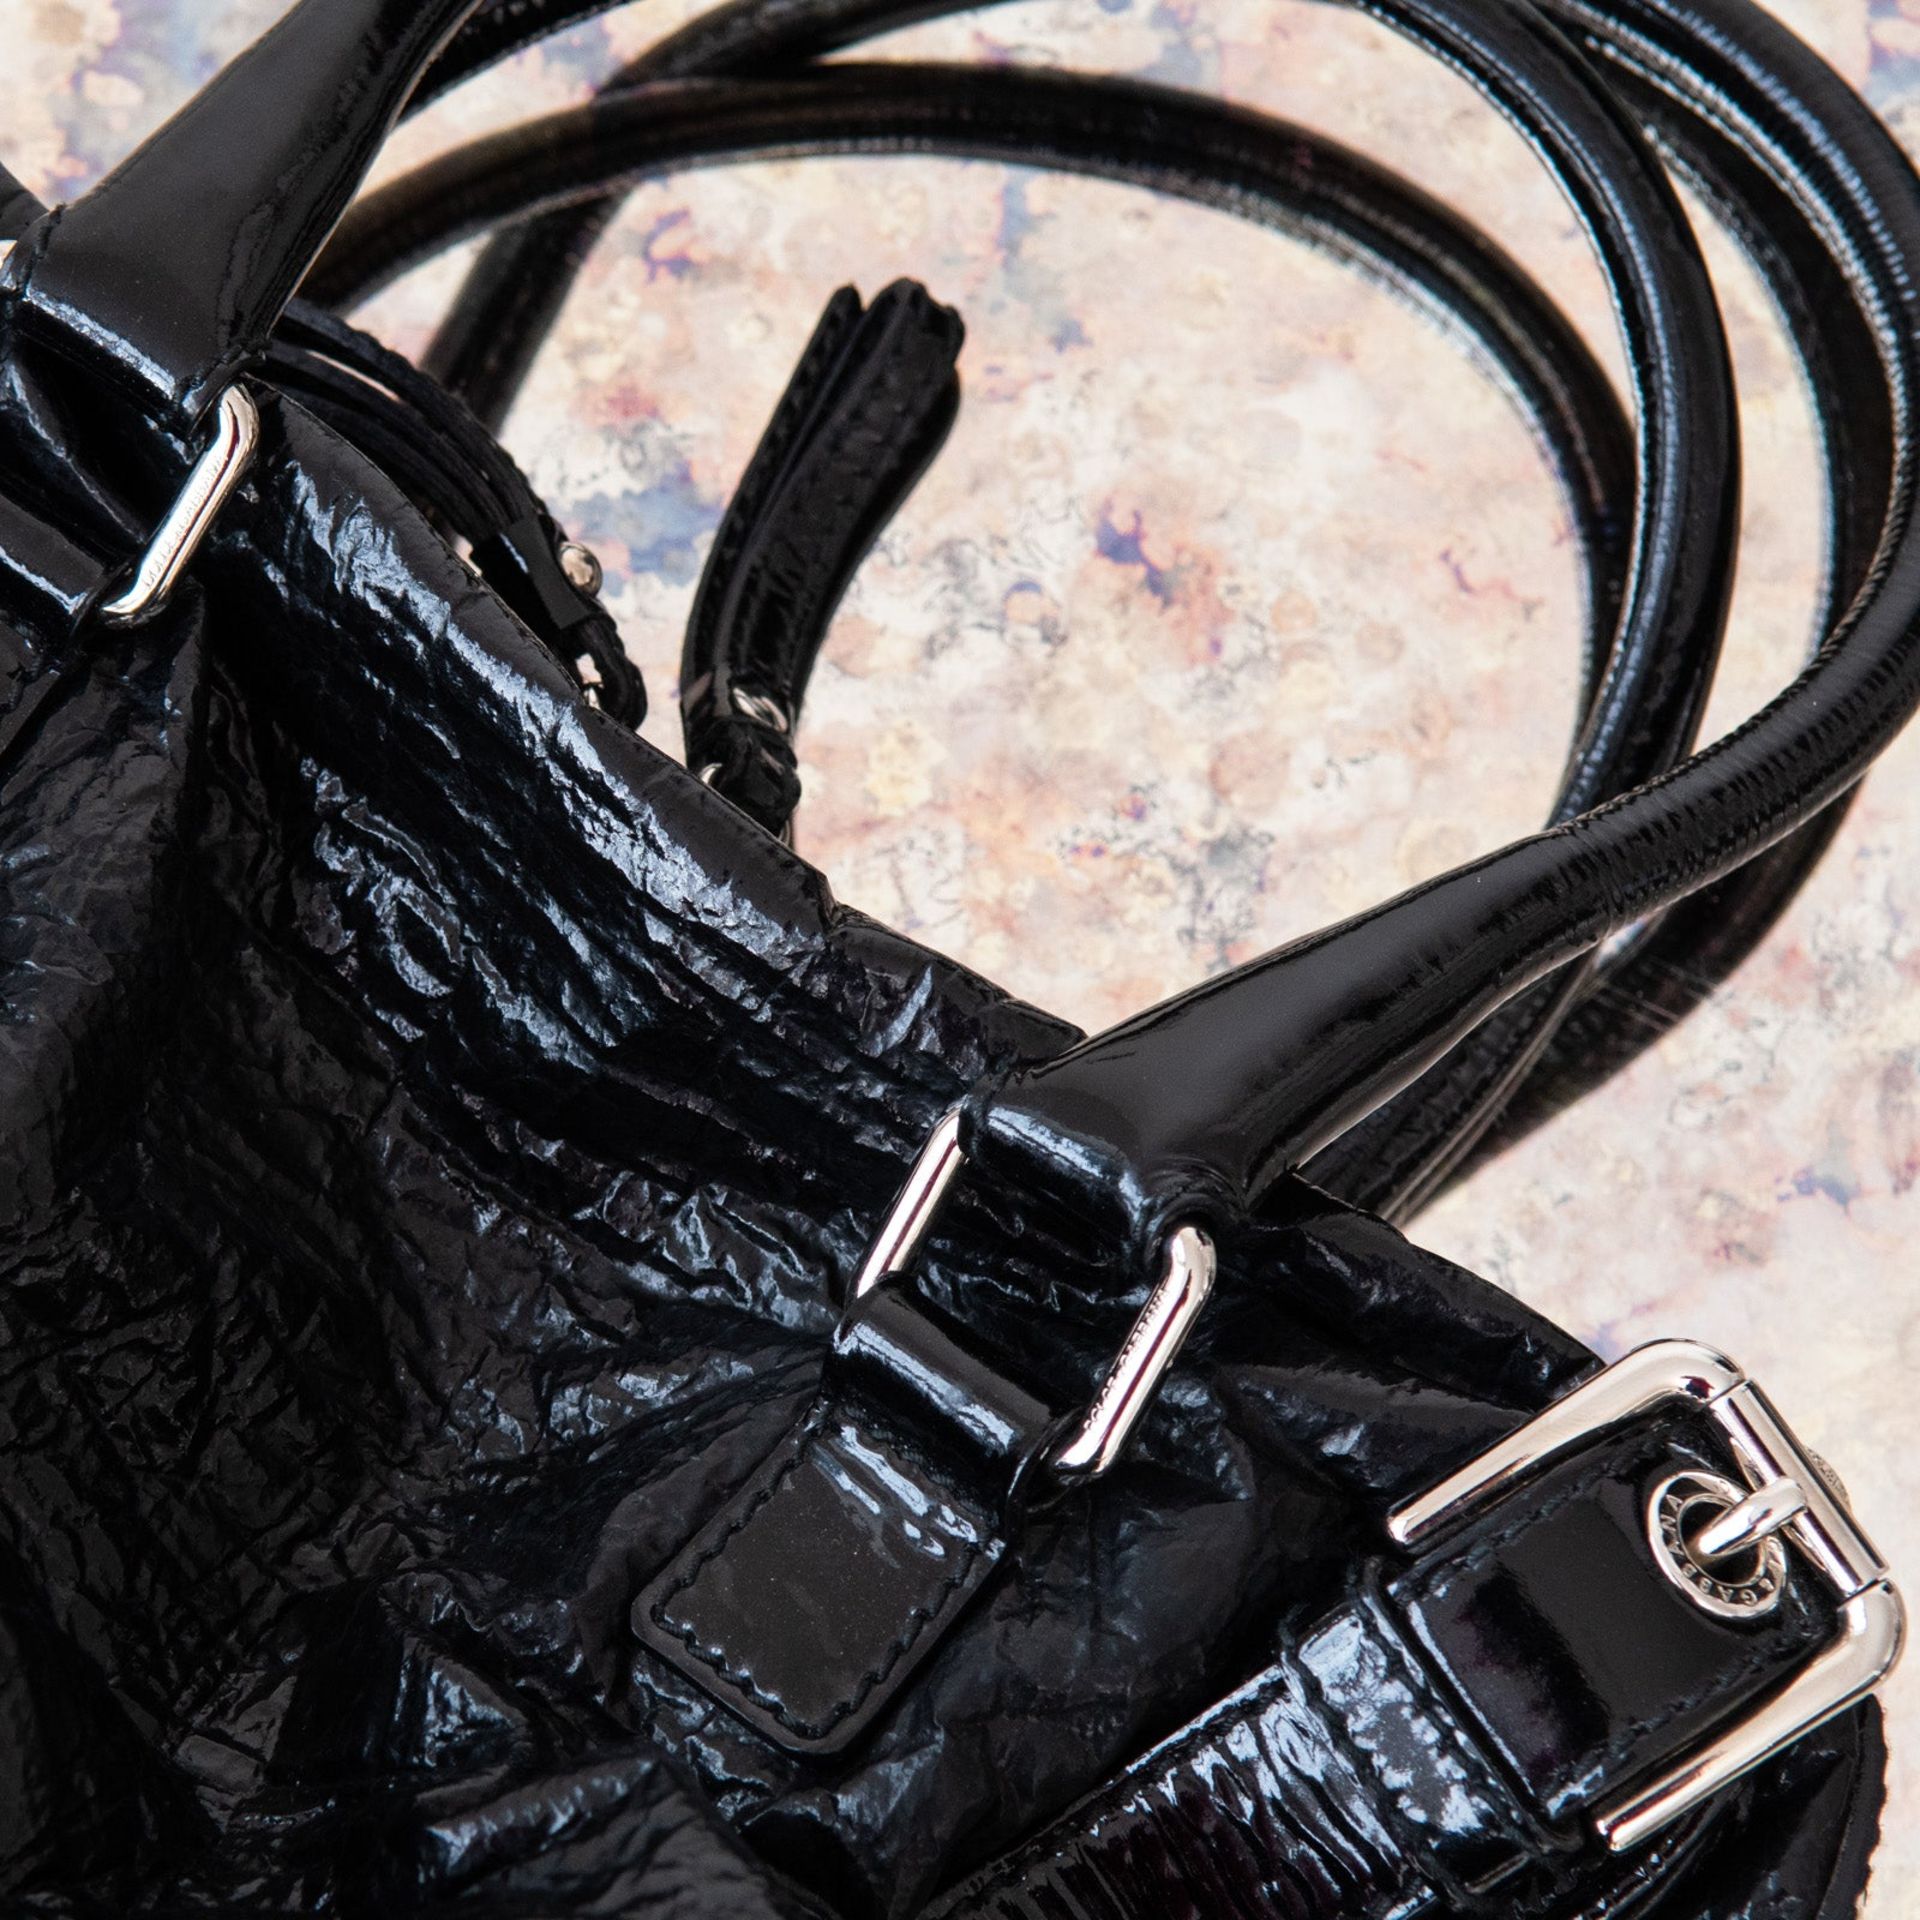 Dolce and Gabbana Black Patent Bag - Image 9 of 10